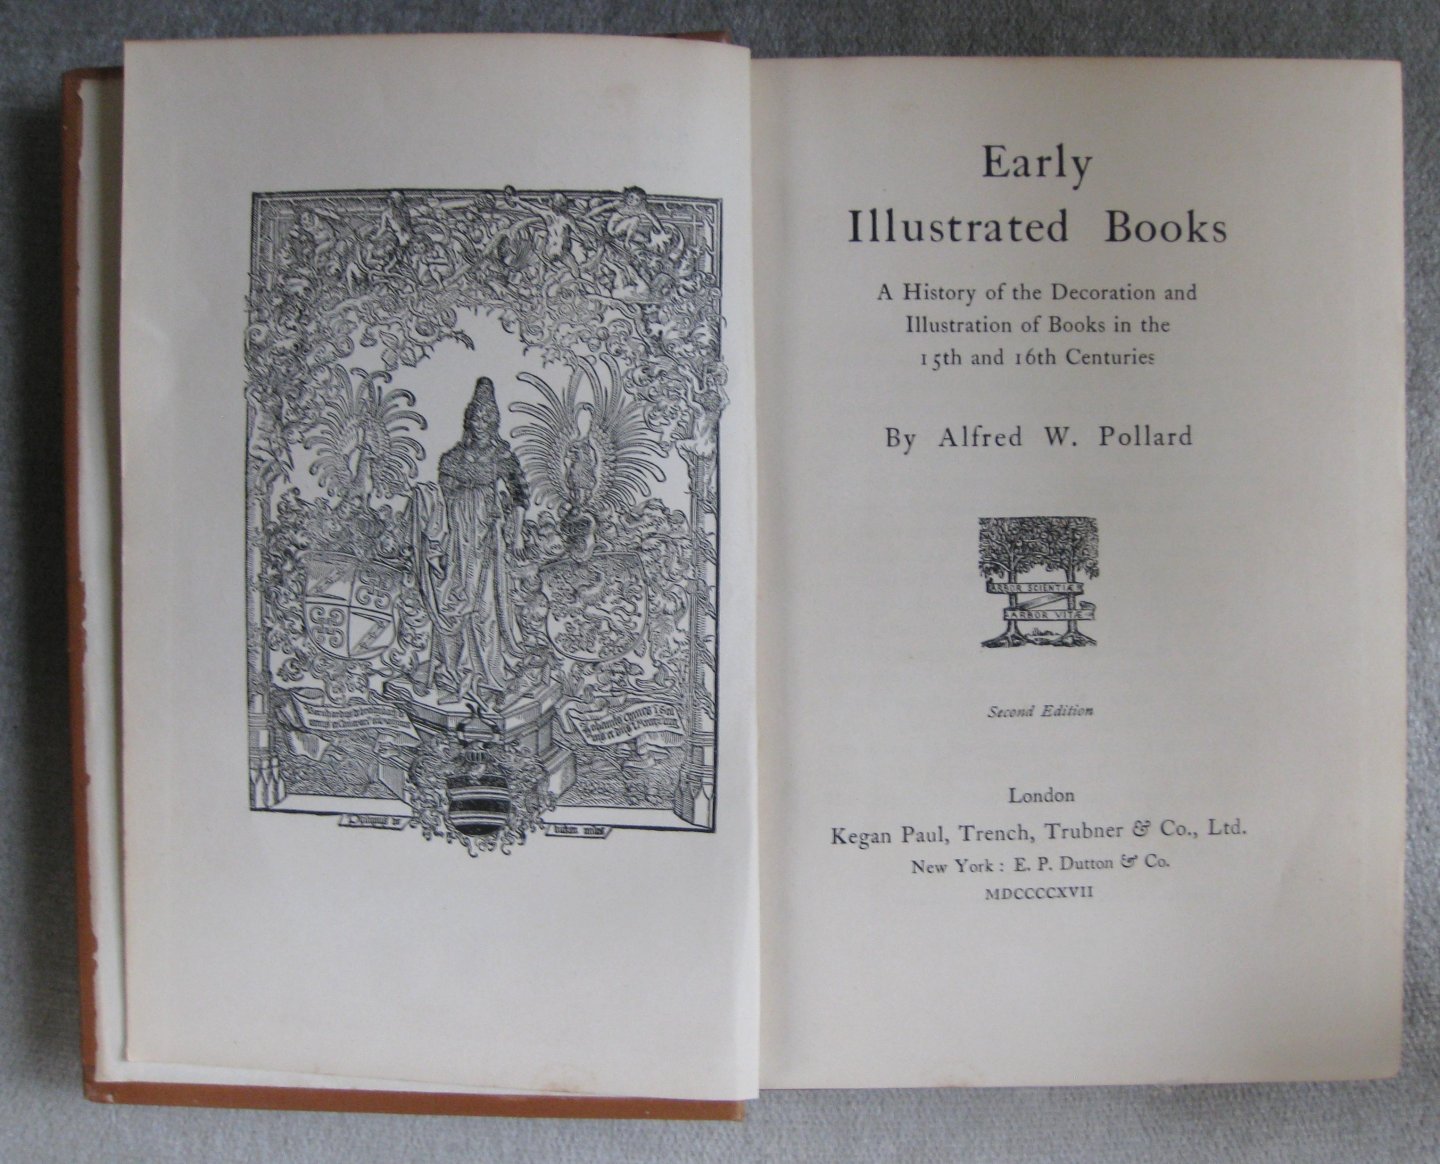 Pollard, Alfred W. - Early illustrated books / A history of the decoration and illustration of books in the 15th and 16th Centuries